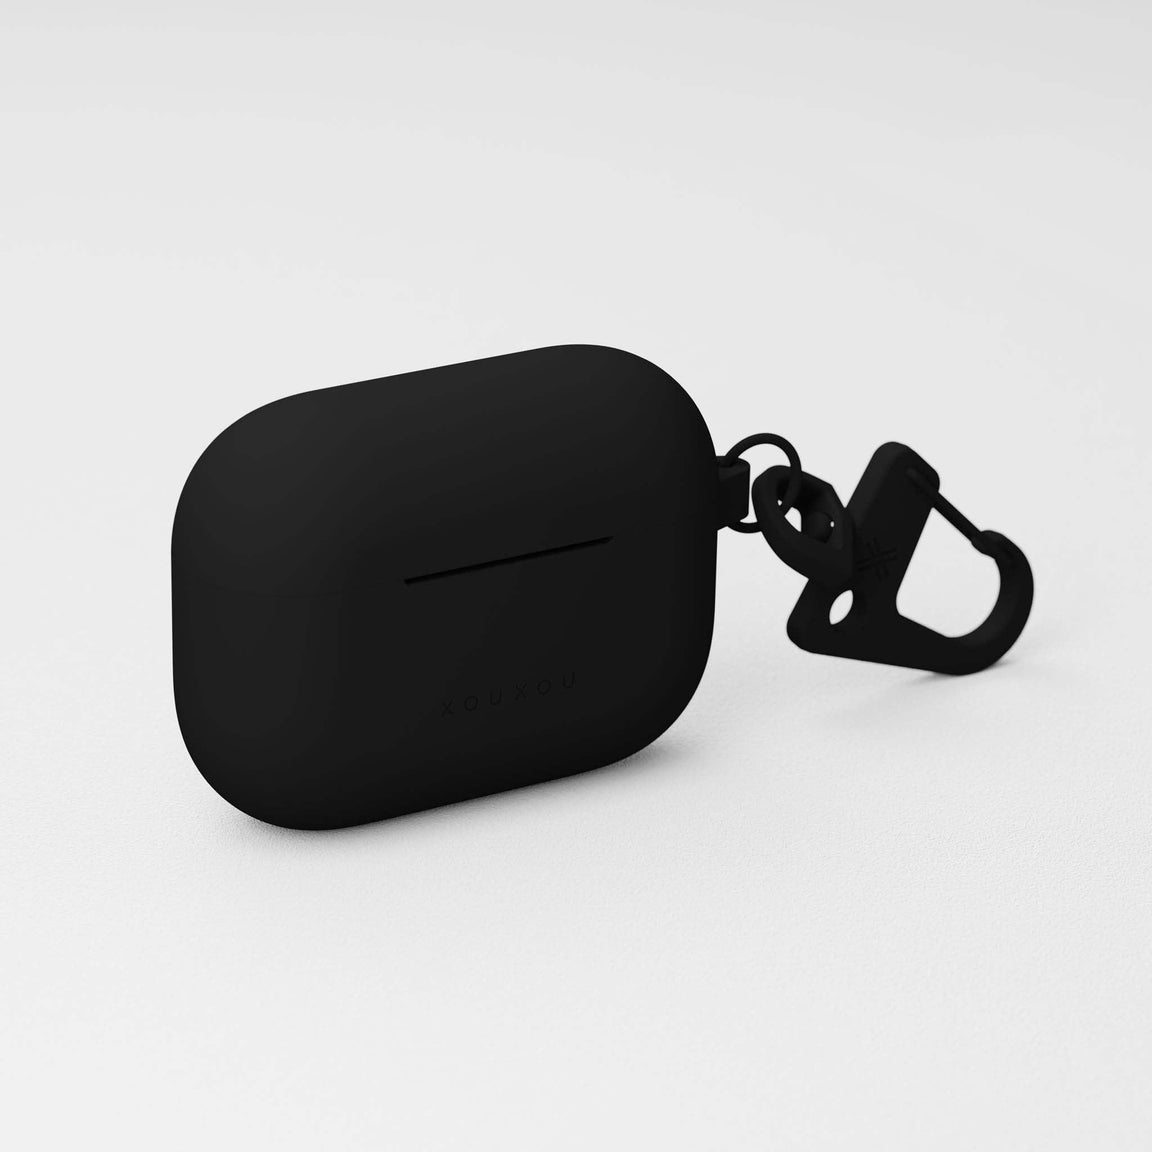 Apple Airpods Pro case in Black silicone with black carabiner hook | XOUXOU